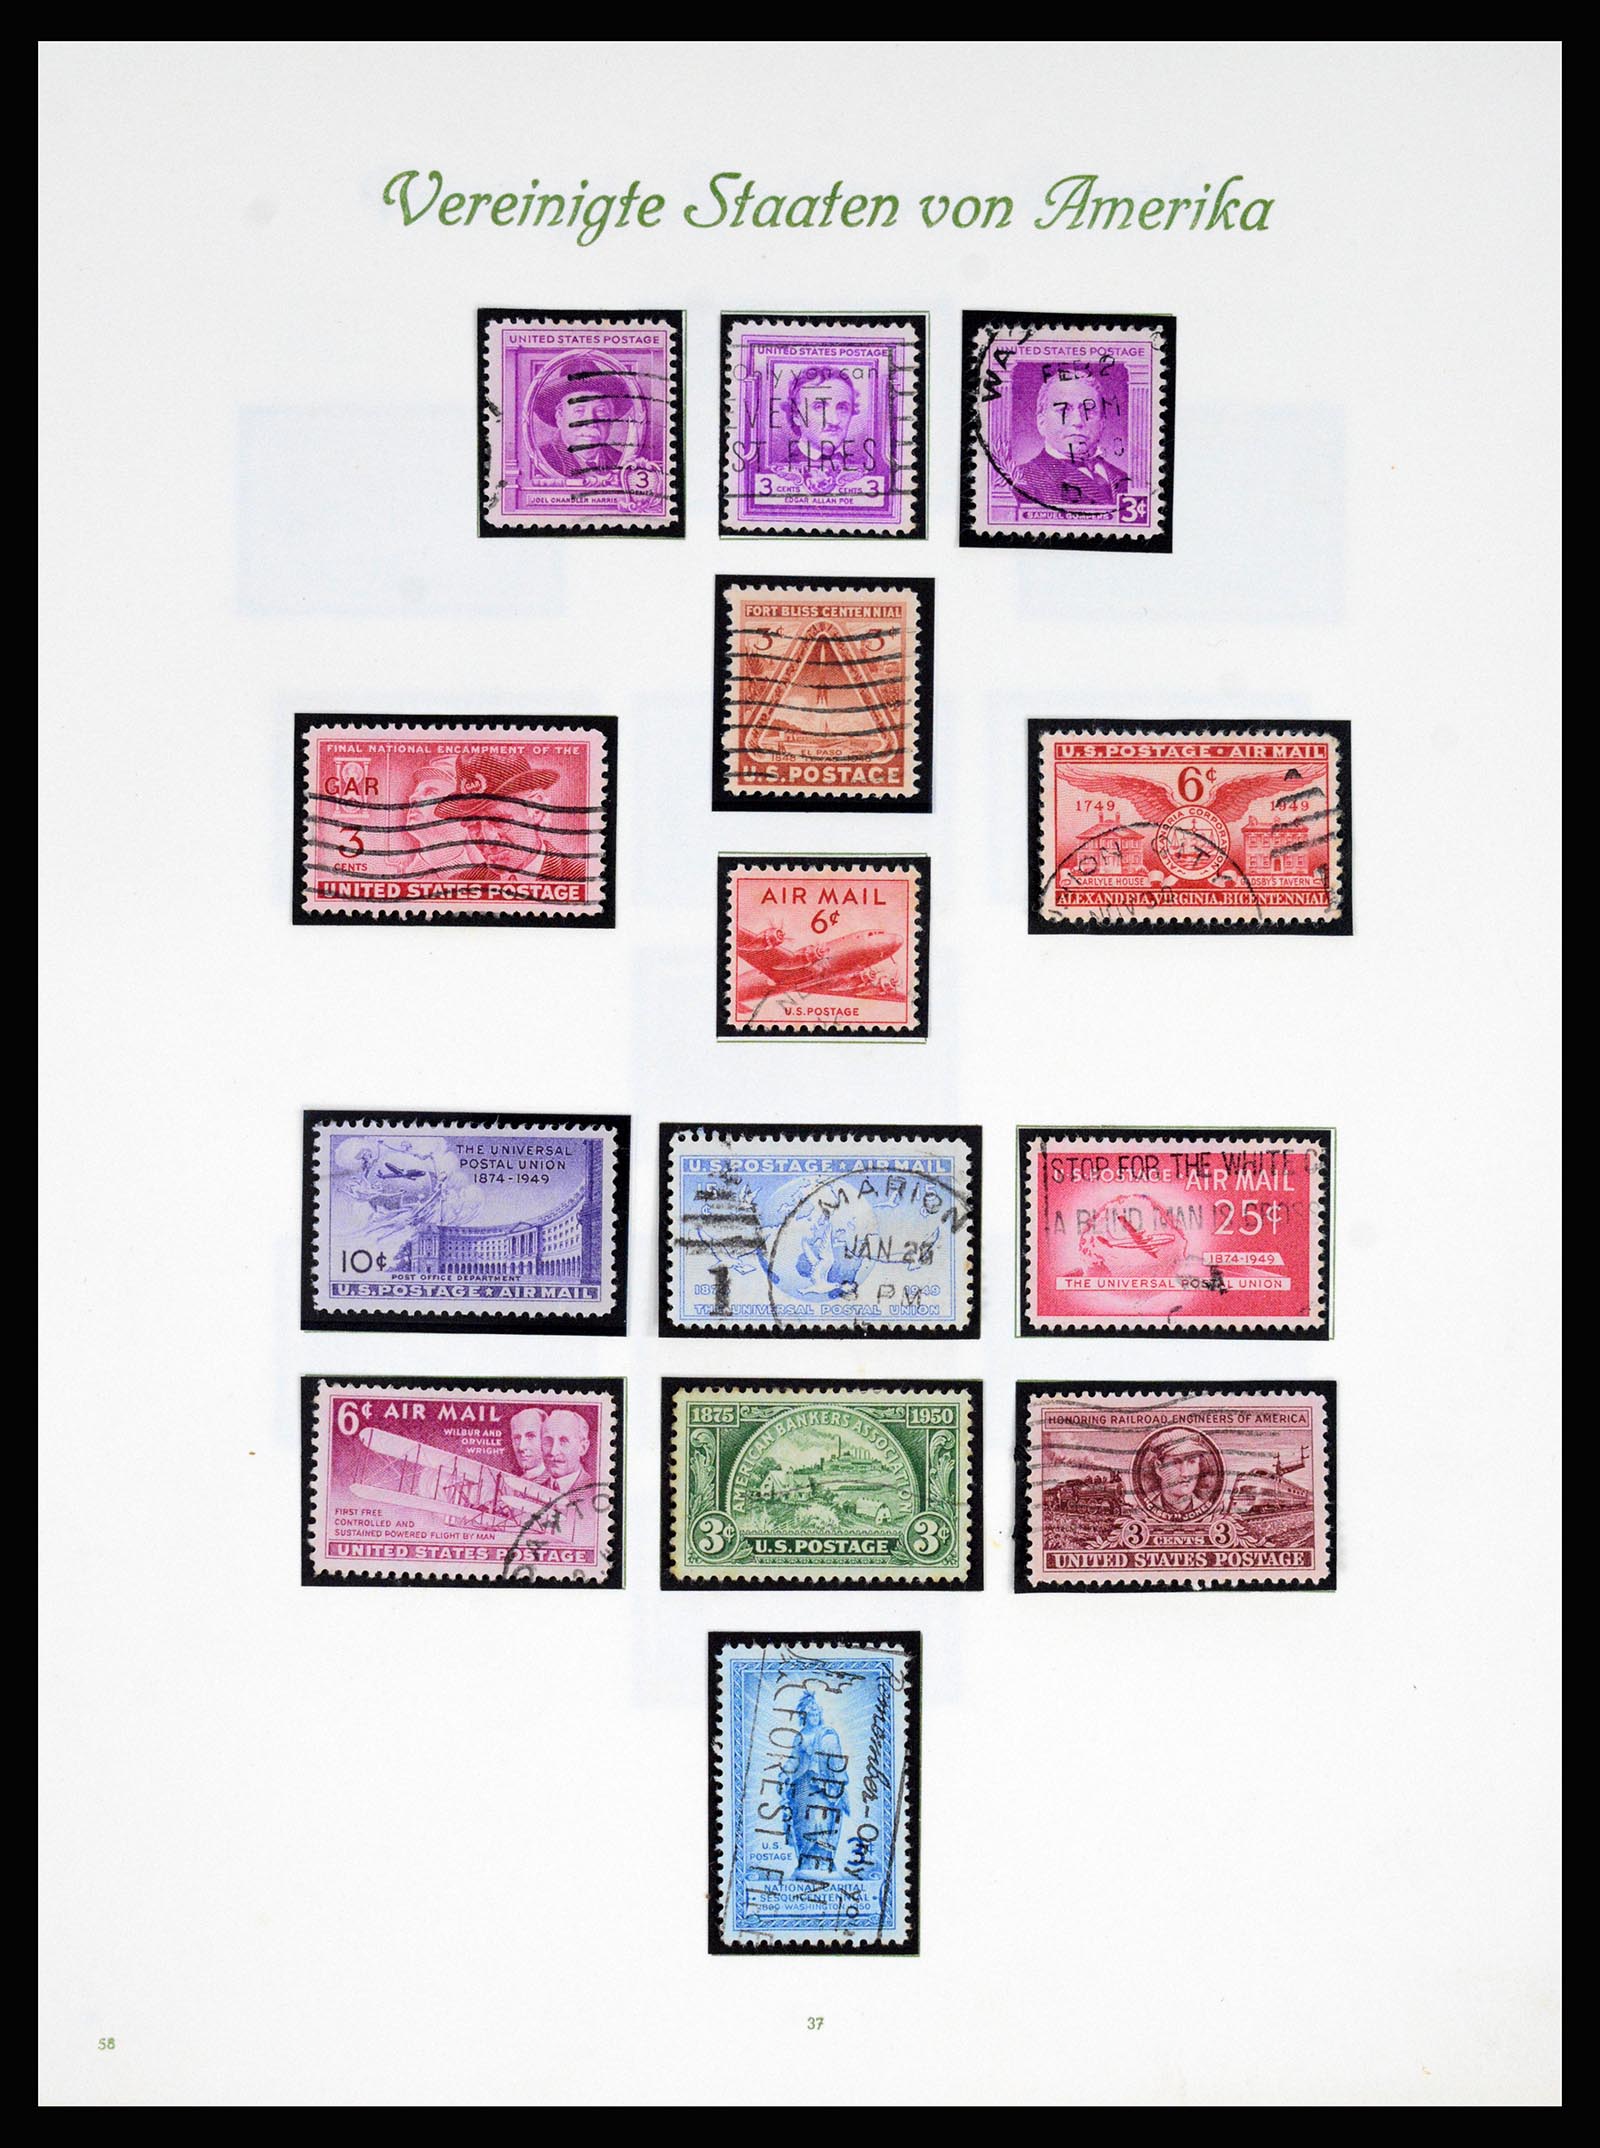 37125 038 - Stamp collection 37125 USA supercollection 1847-1963.